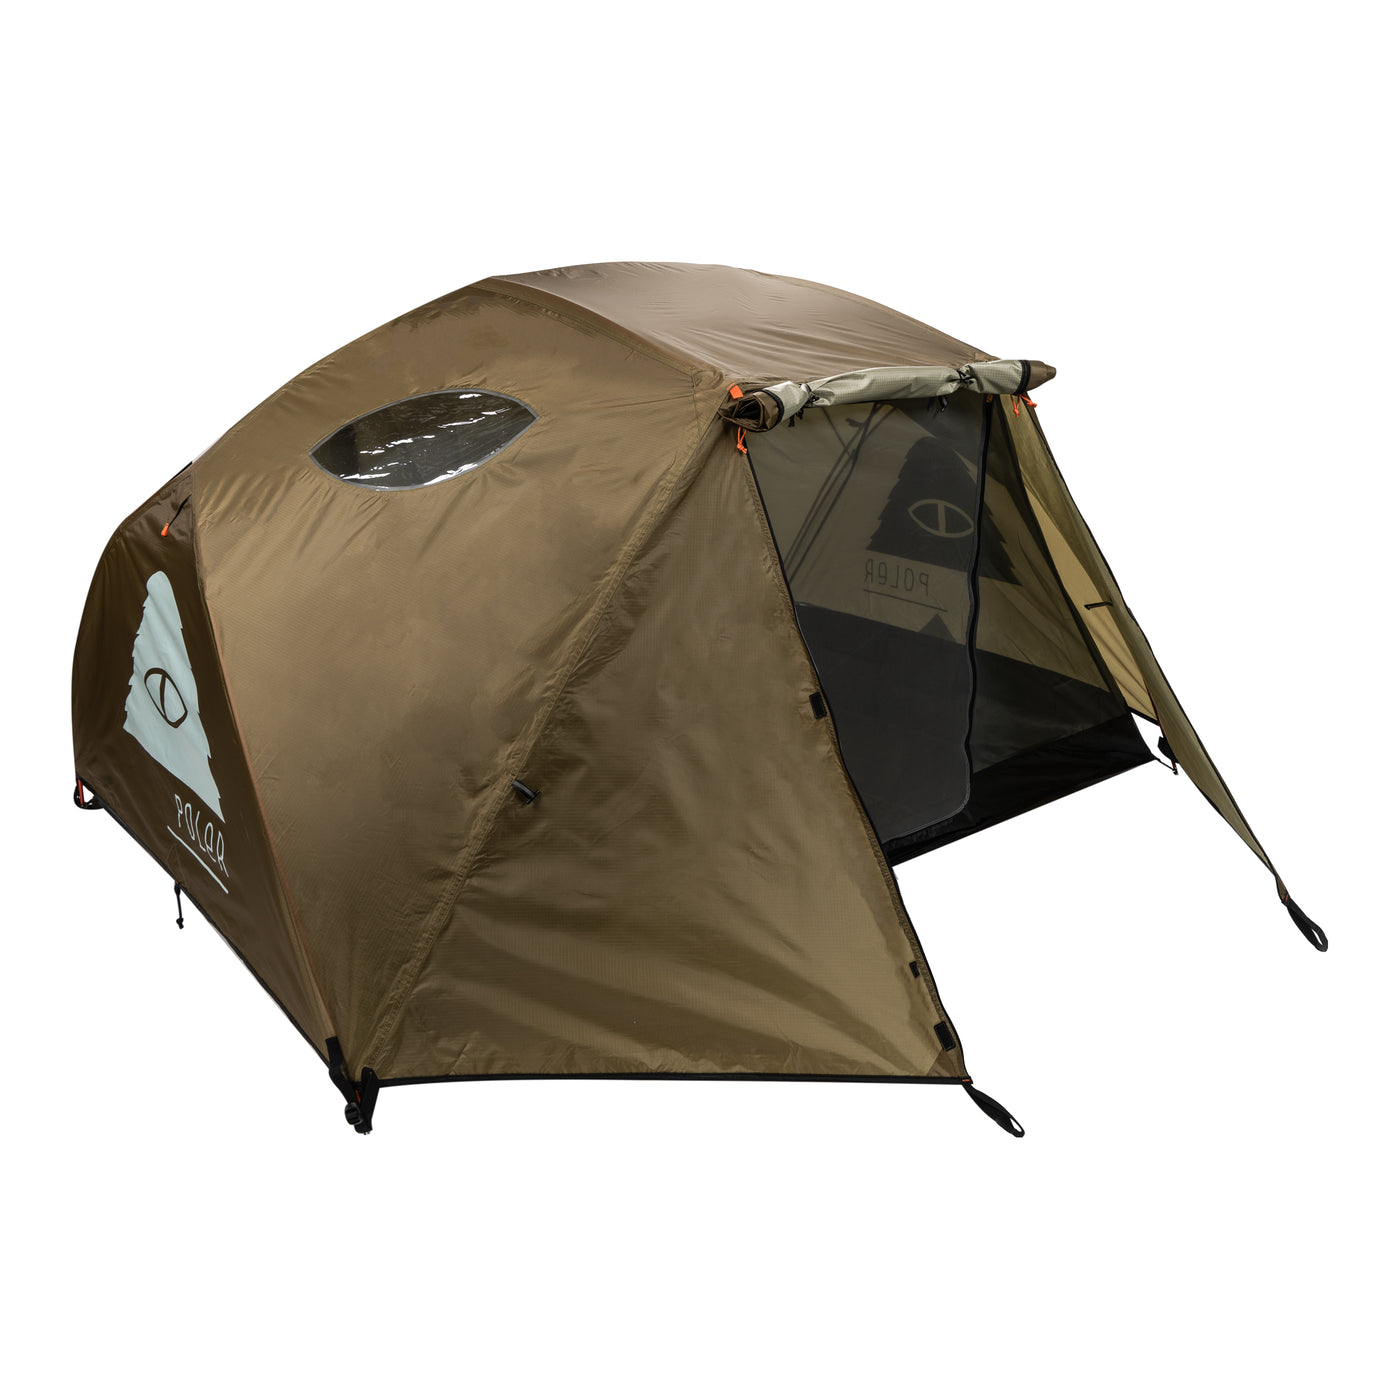 2 Person Tent - Rockies product   